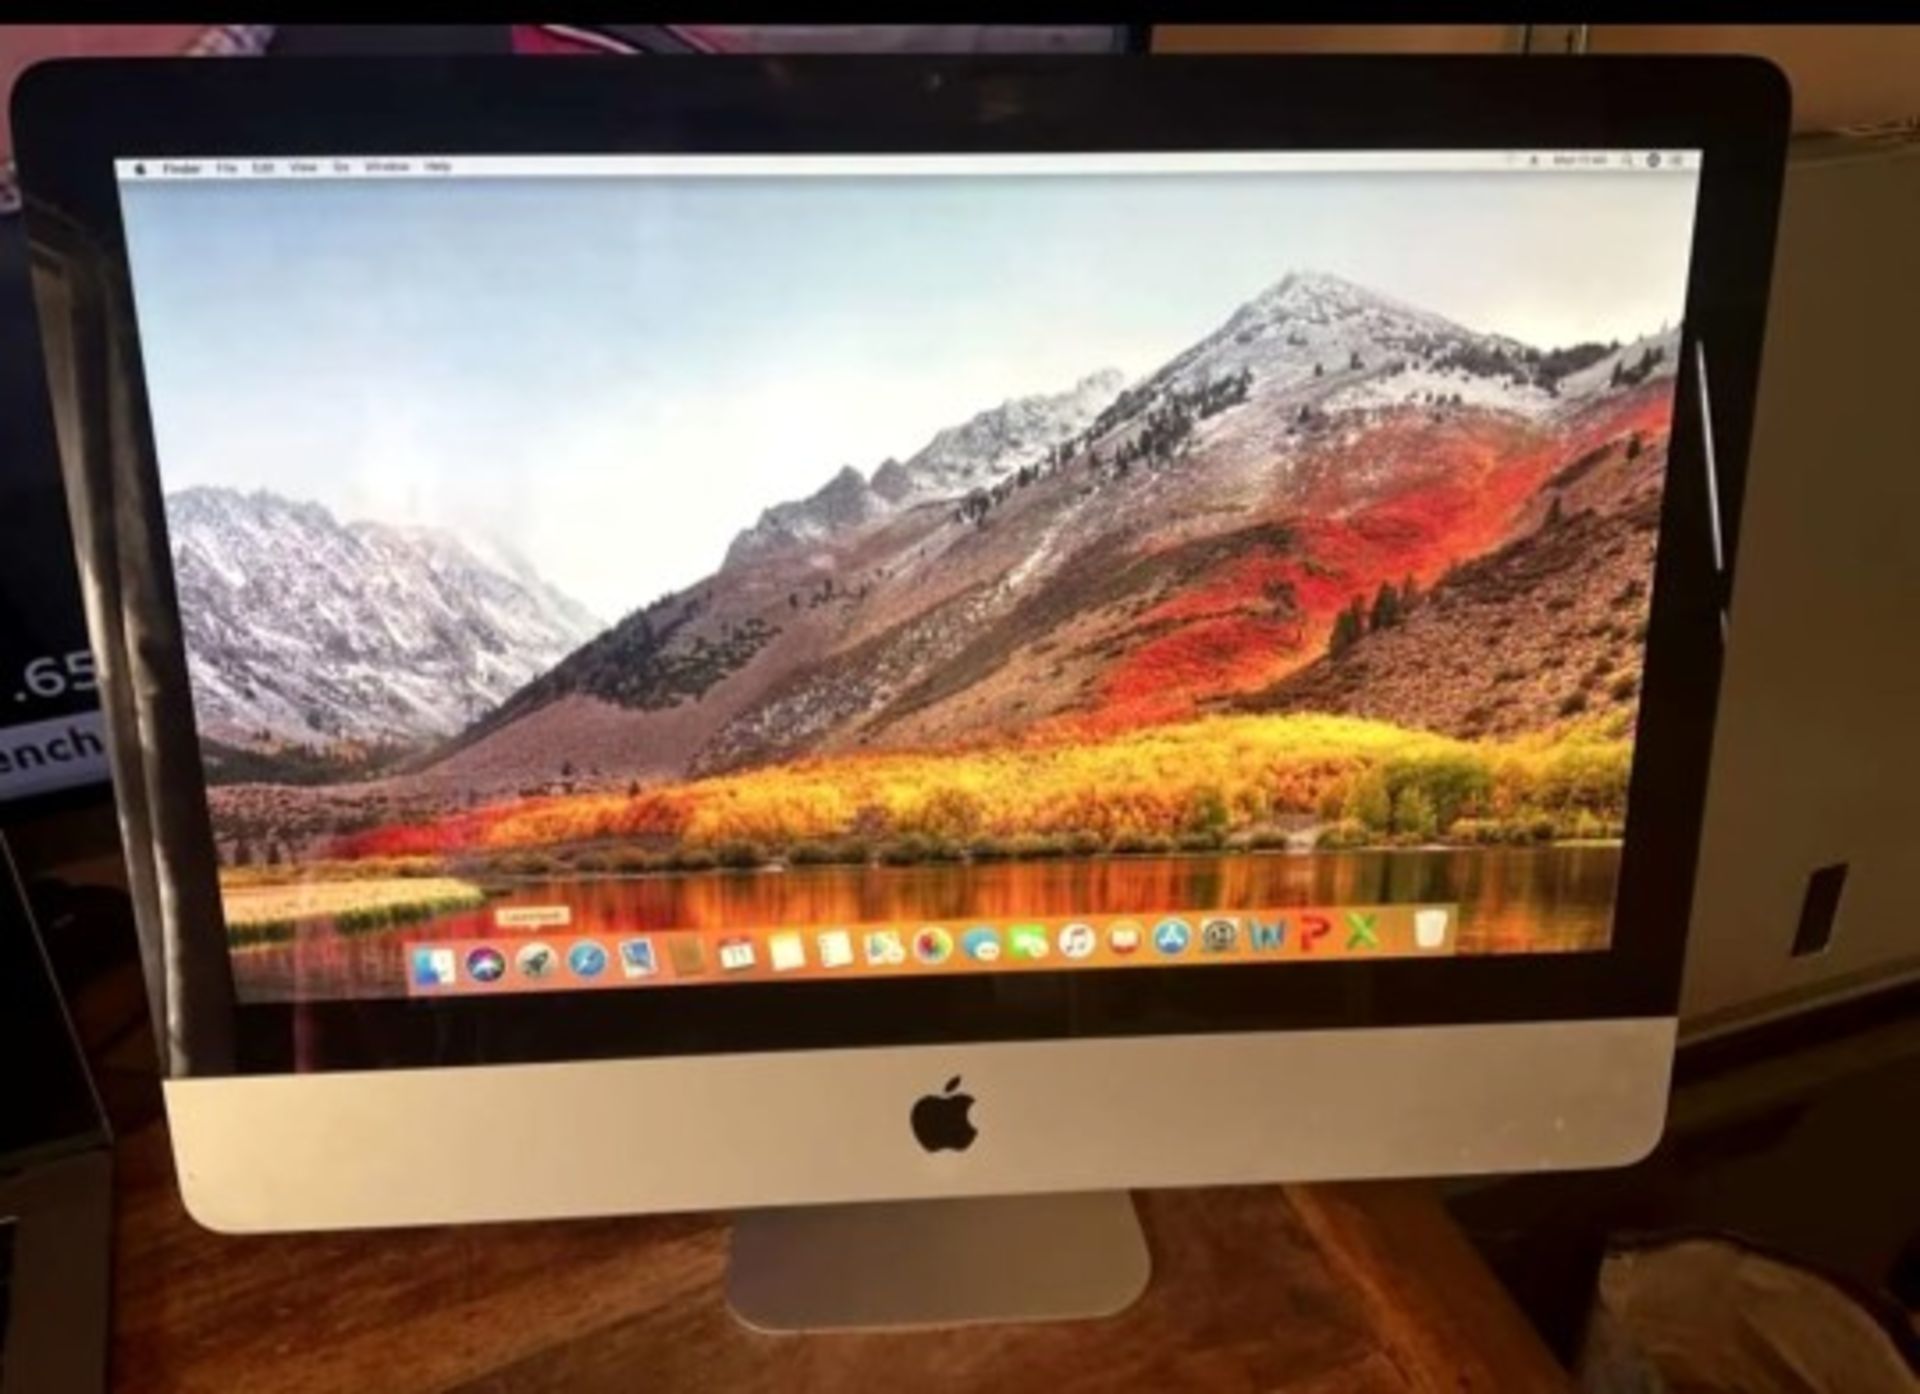 APPLE IMAC 20'' CORE 2 DUO 2GB 250GB Radeon. Complete Reset With Mac OS X, And Microsoft Office - Image 2 of 2